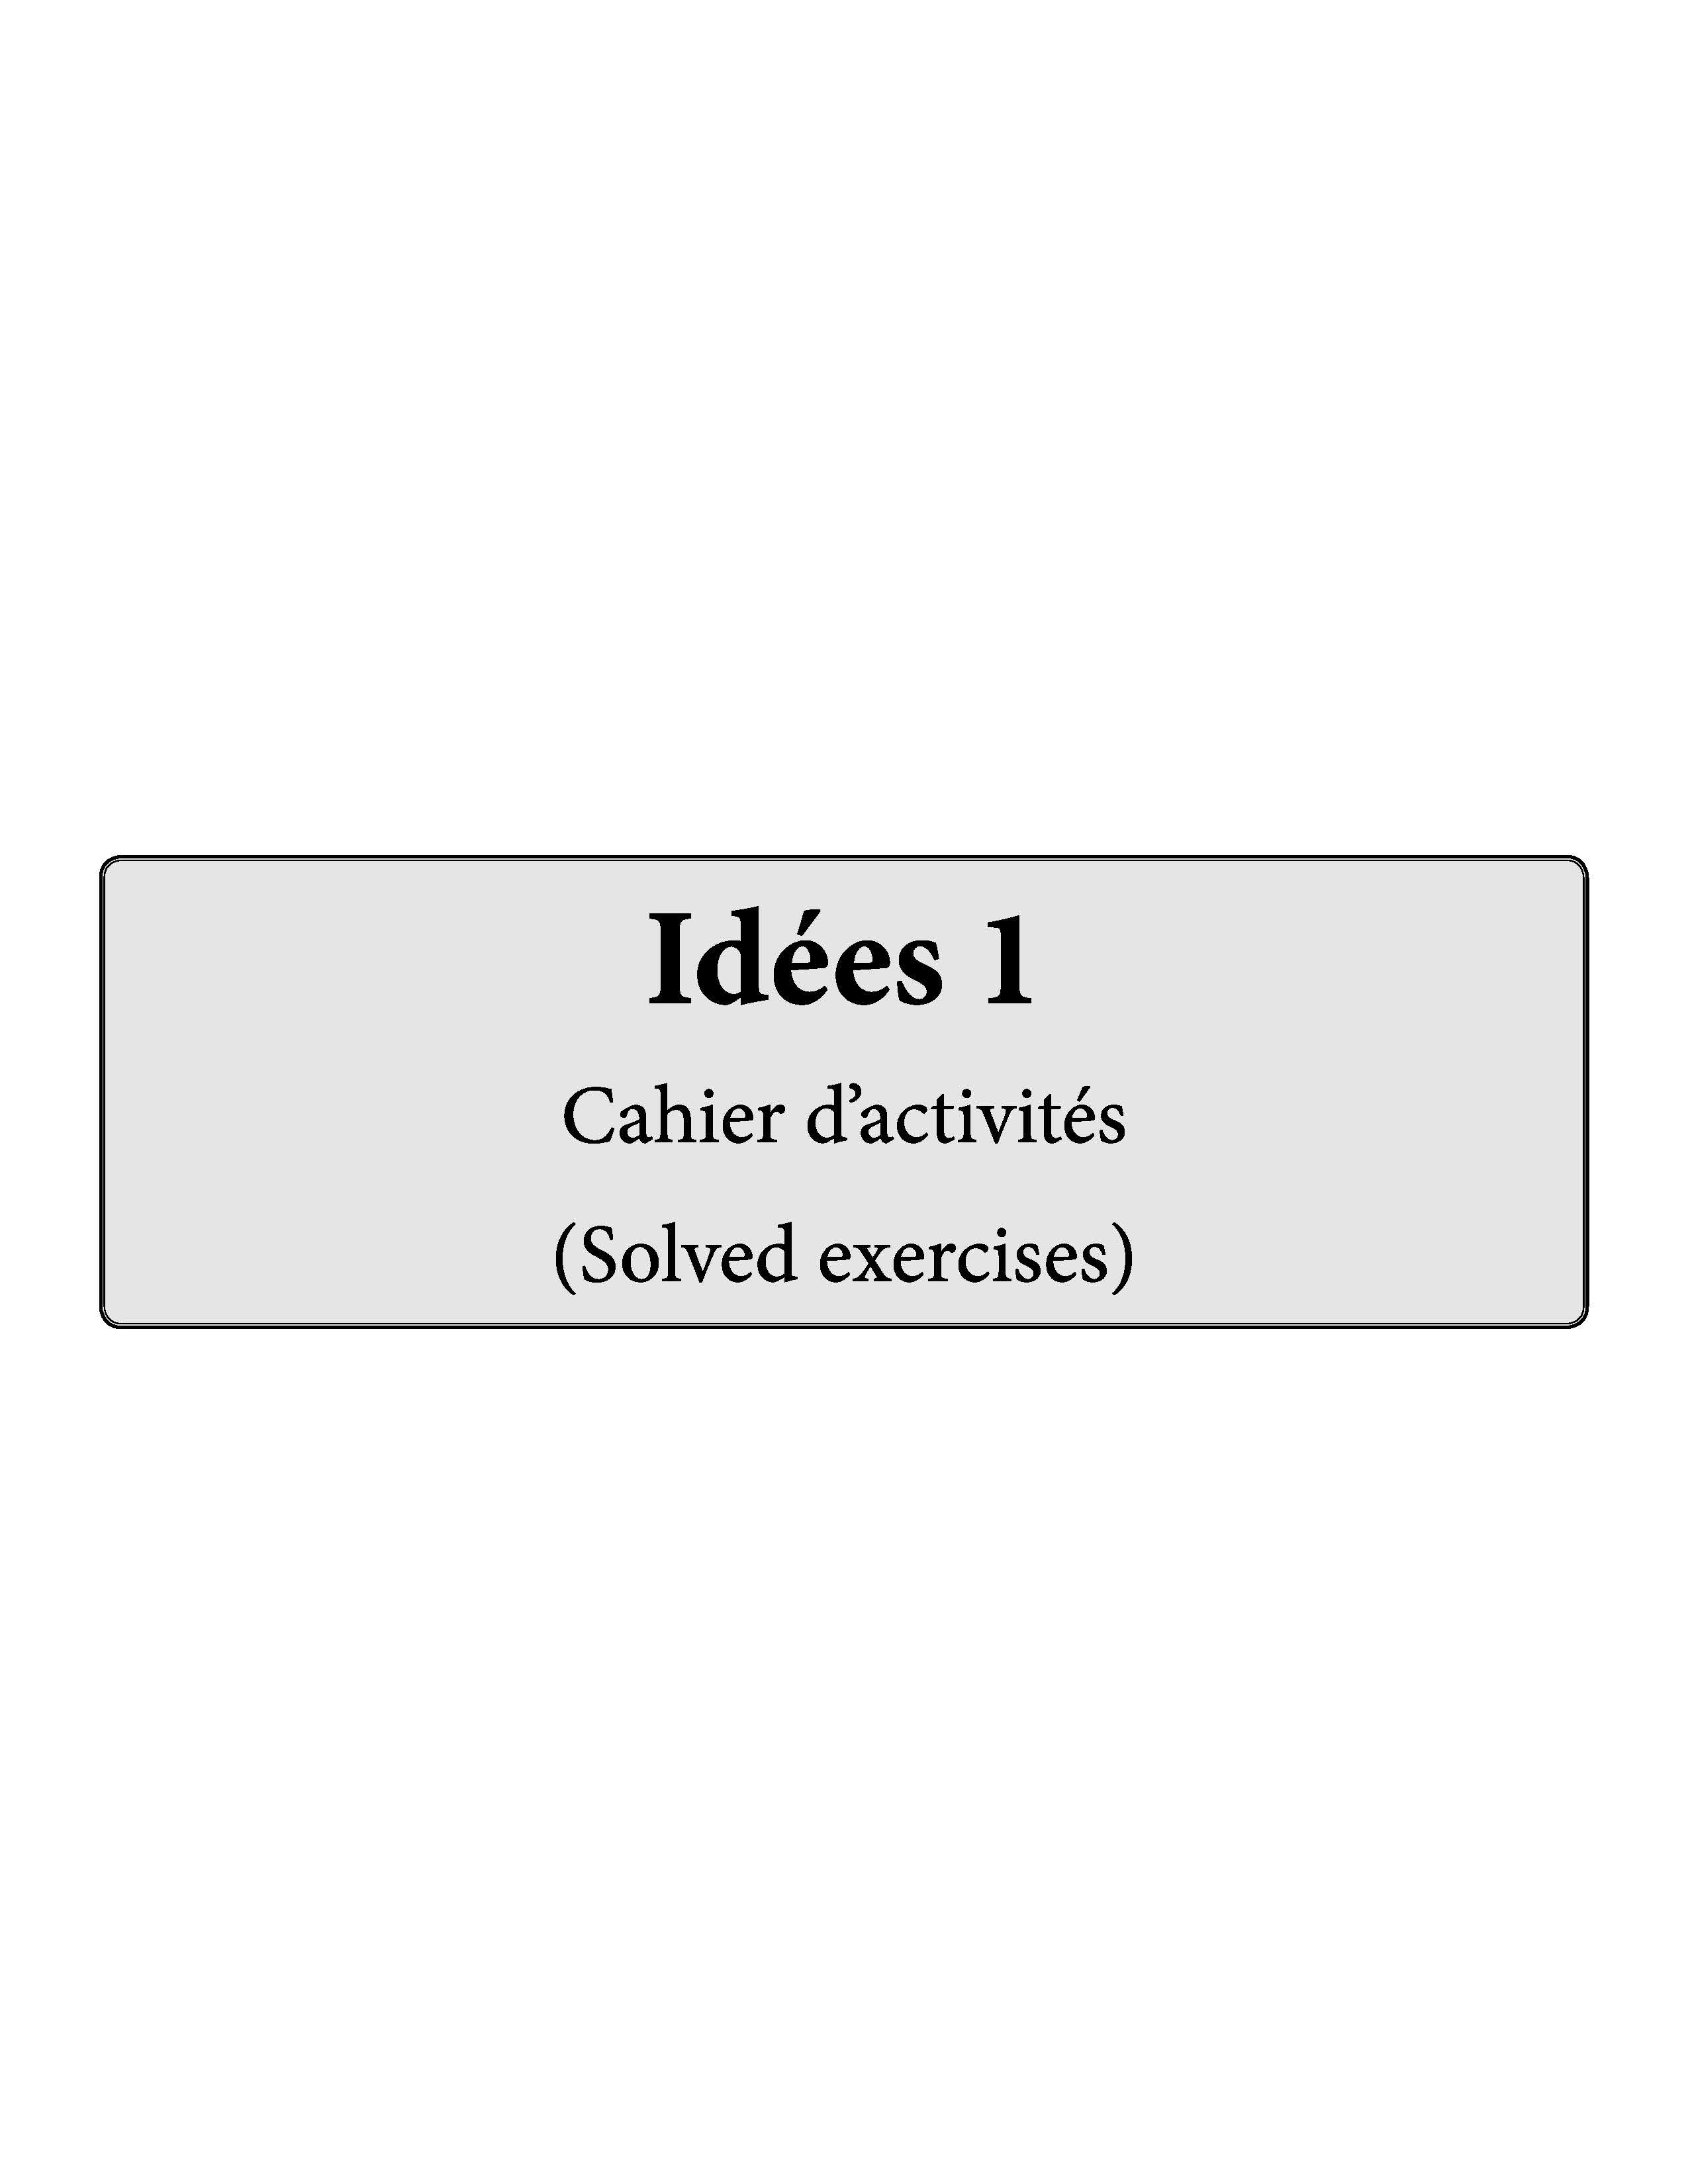 Idées Complete Study Material 1 (For Class 6) Solved Exercises